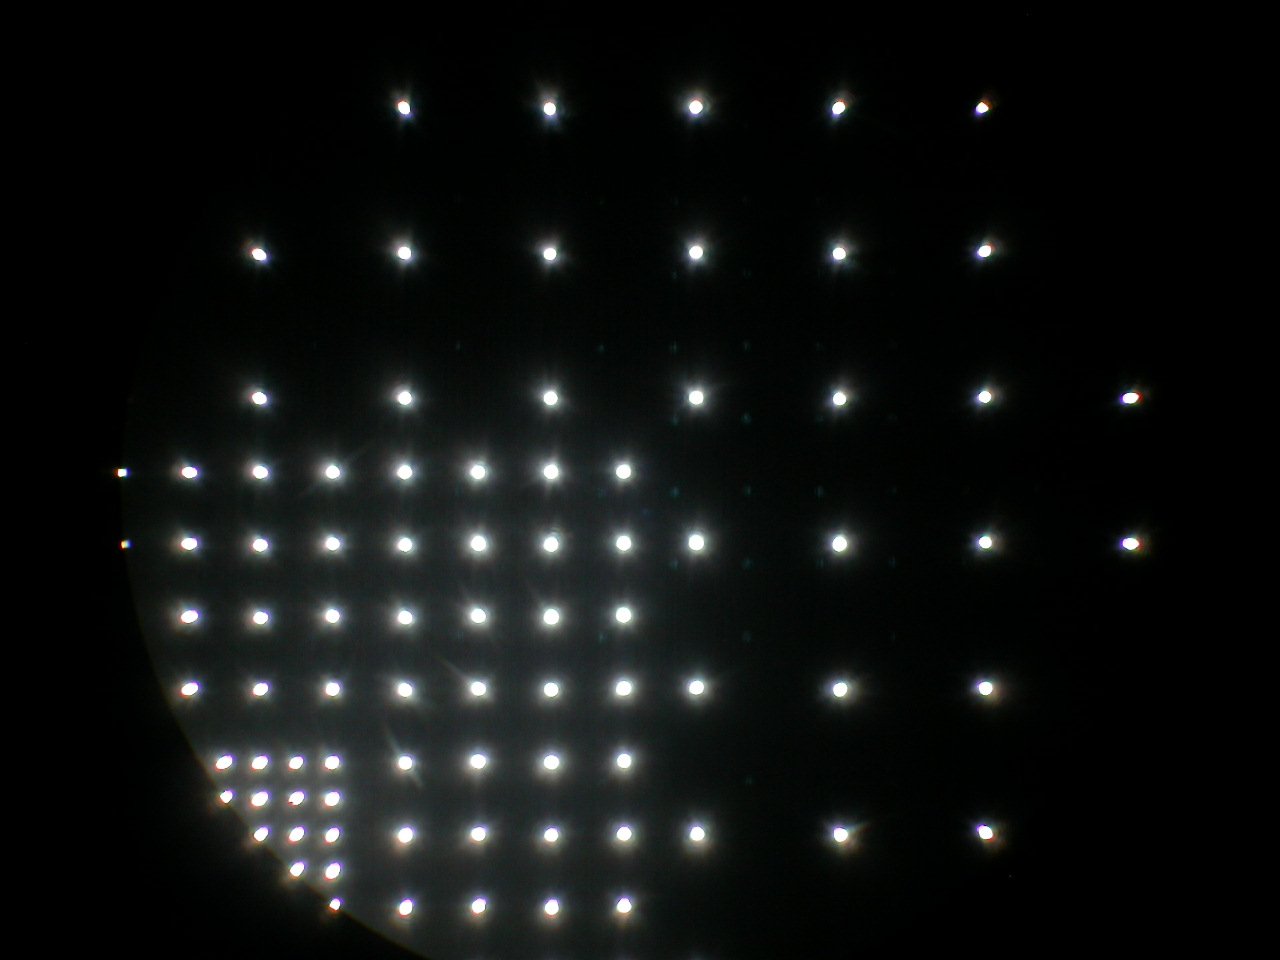 Hole array in stainless steel using an infrared laser